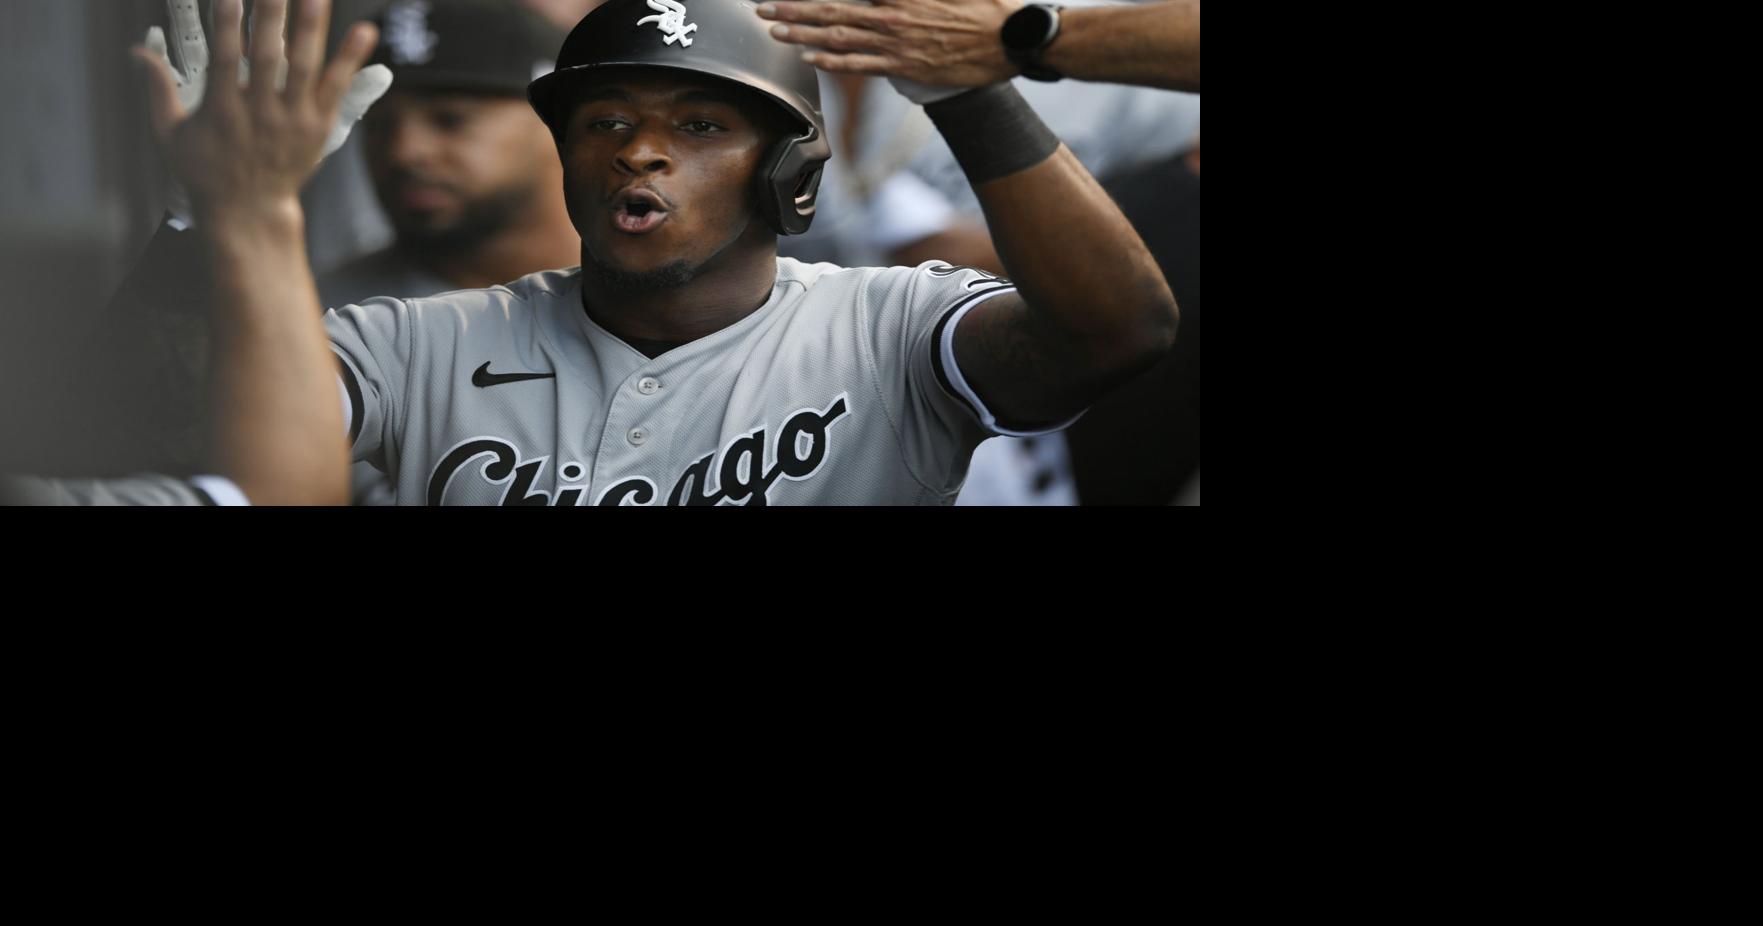 Tim Anderson Chicago White Sox Nike Pitch Black Jersey